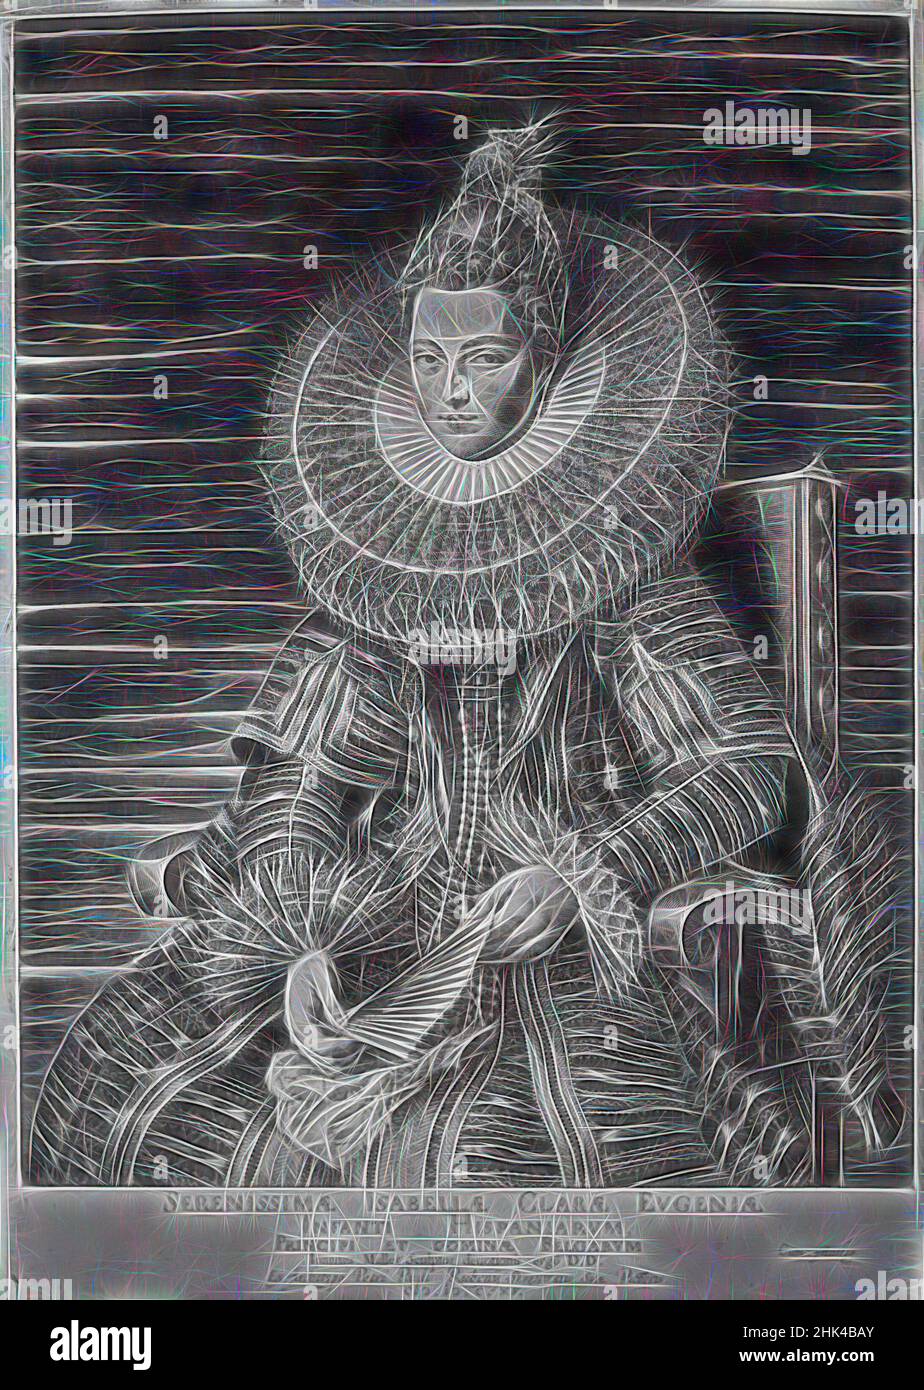 Inspired by Isabella Clara Eugenia, Infanta of Spain, Jan Muller, Dutch, 1571-1628, Engraving on laid paper, 1615, 16 7/16 x 11 9/16 in., 41.8 x 29.4 cm, elite, historic person, historical painting, royal, ruler, wealth, Reimagined by Artotop. Classic art reinvented with a modern twist. Design of warm cheerful glowing of brightness and light ray radiance. Photography inspired by surrealism and futurism, embracing dynamic energy of modern technology, movement, speed and revolutionize culture Stock Photo